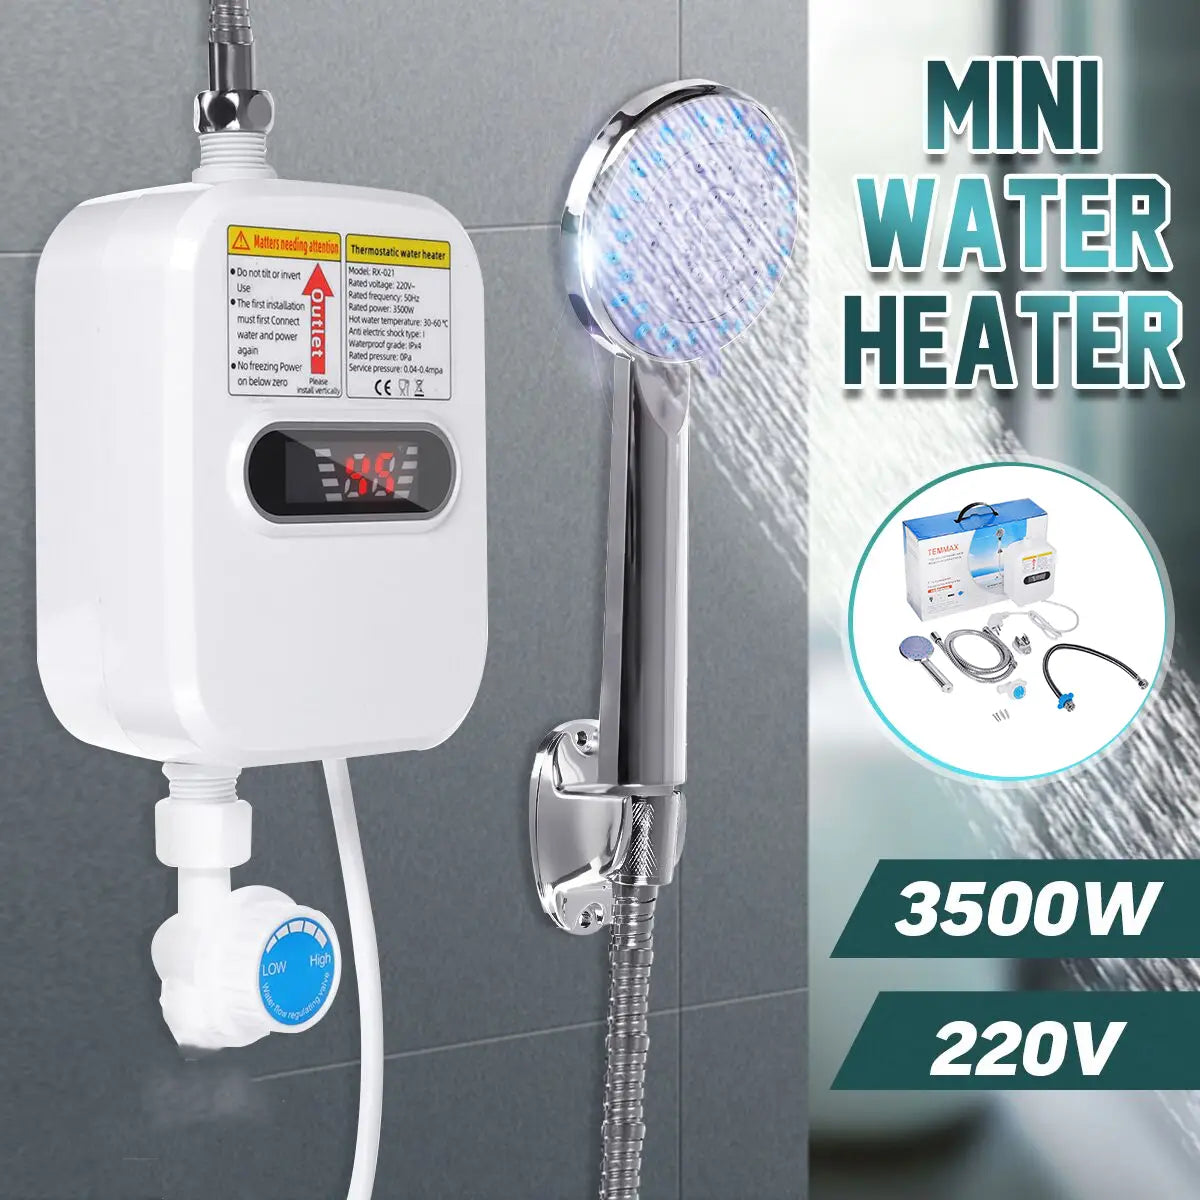 3500w 220v Household Instant Hot Water Heater Plug-in